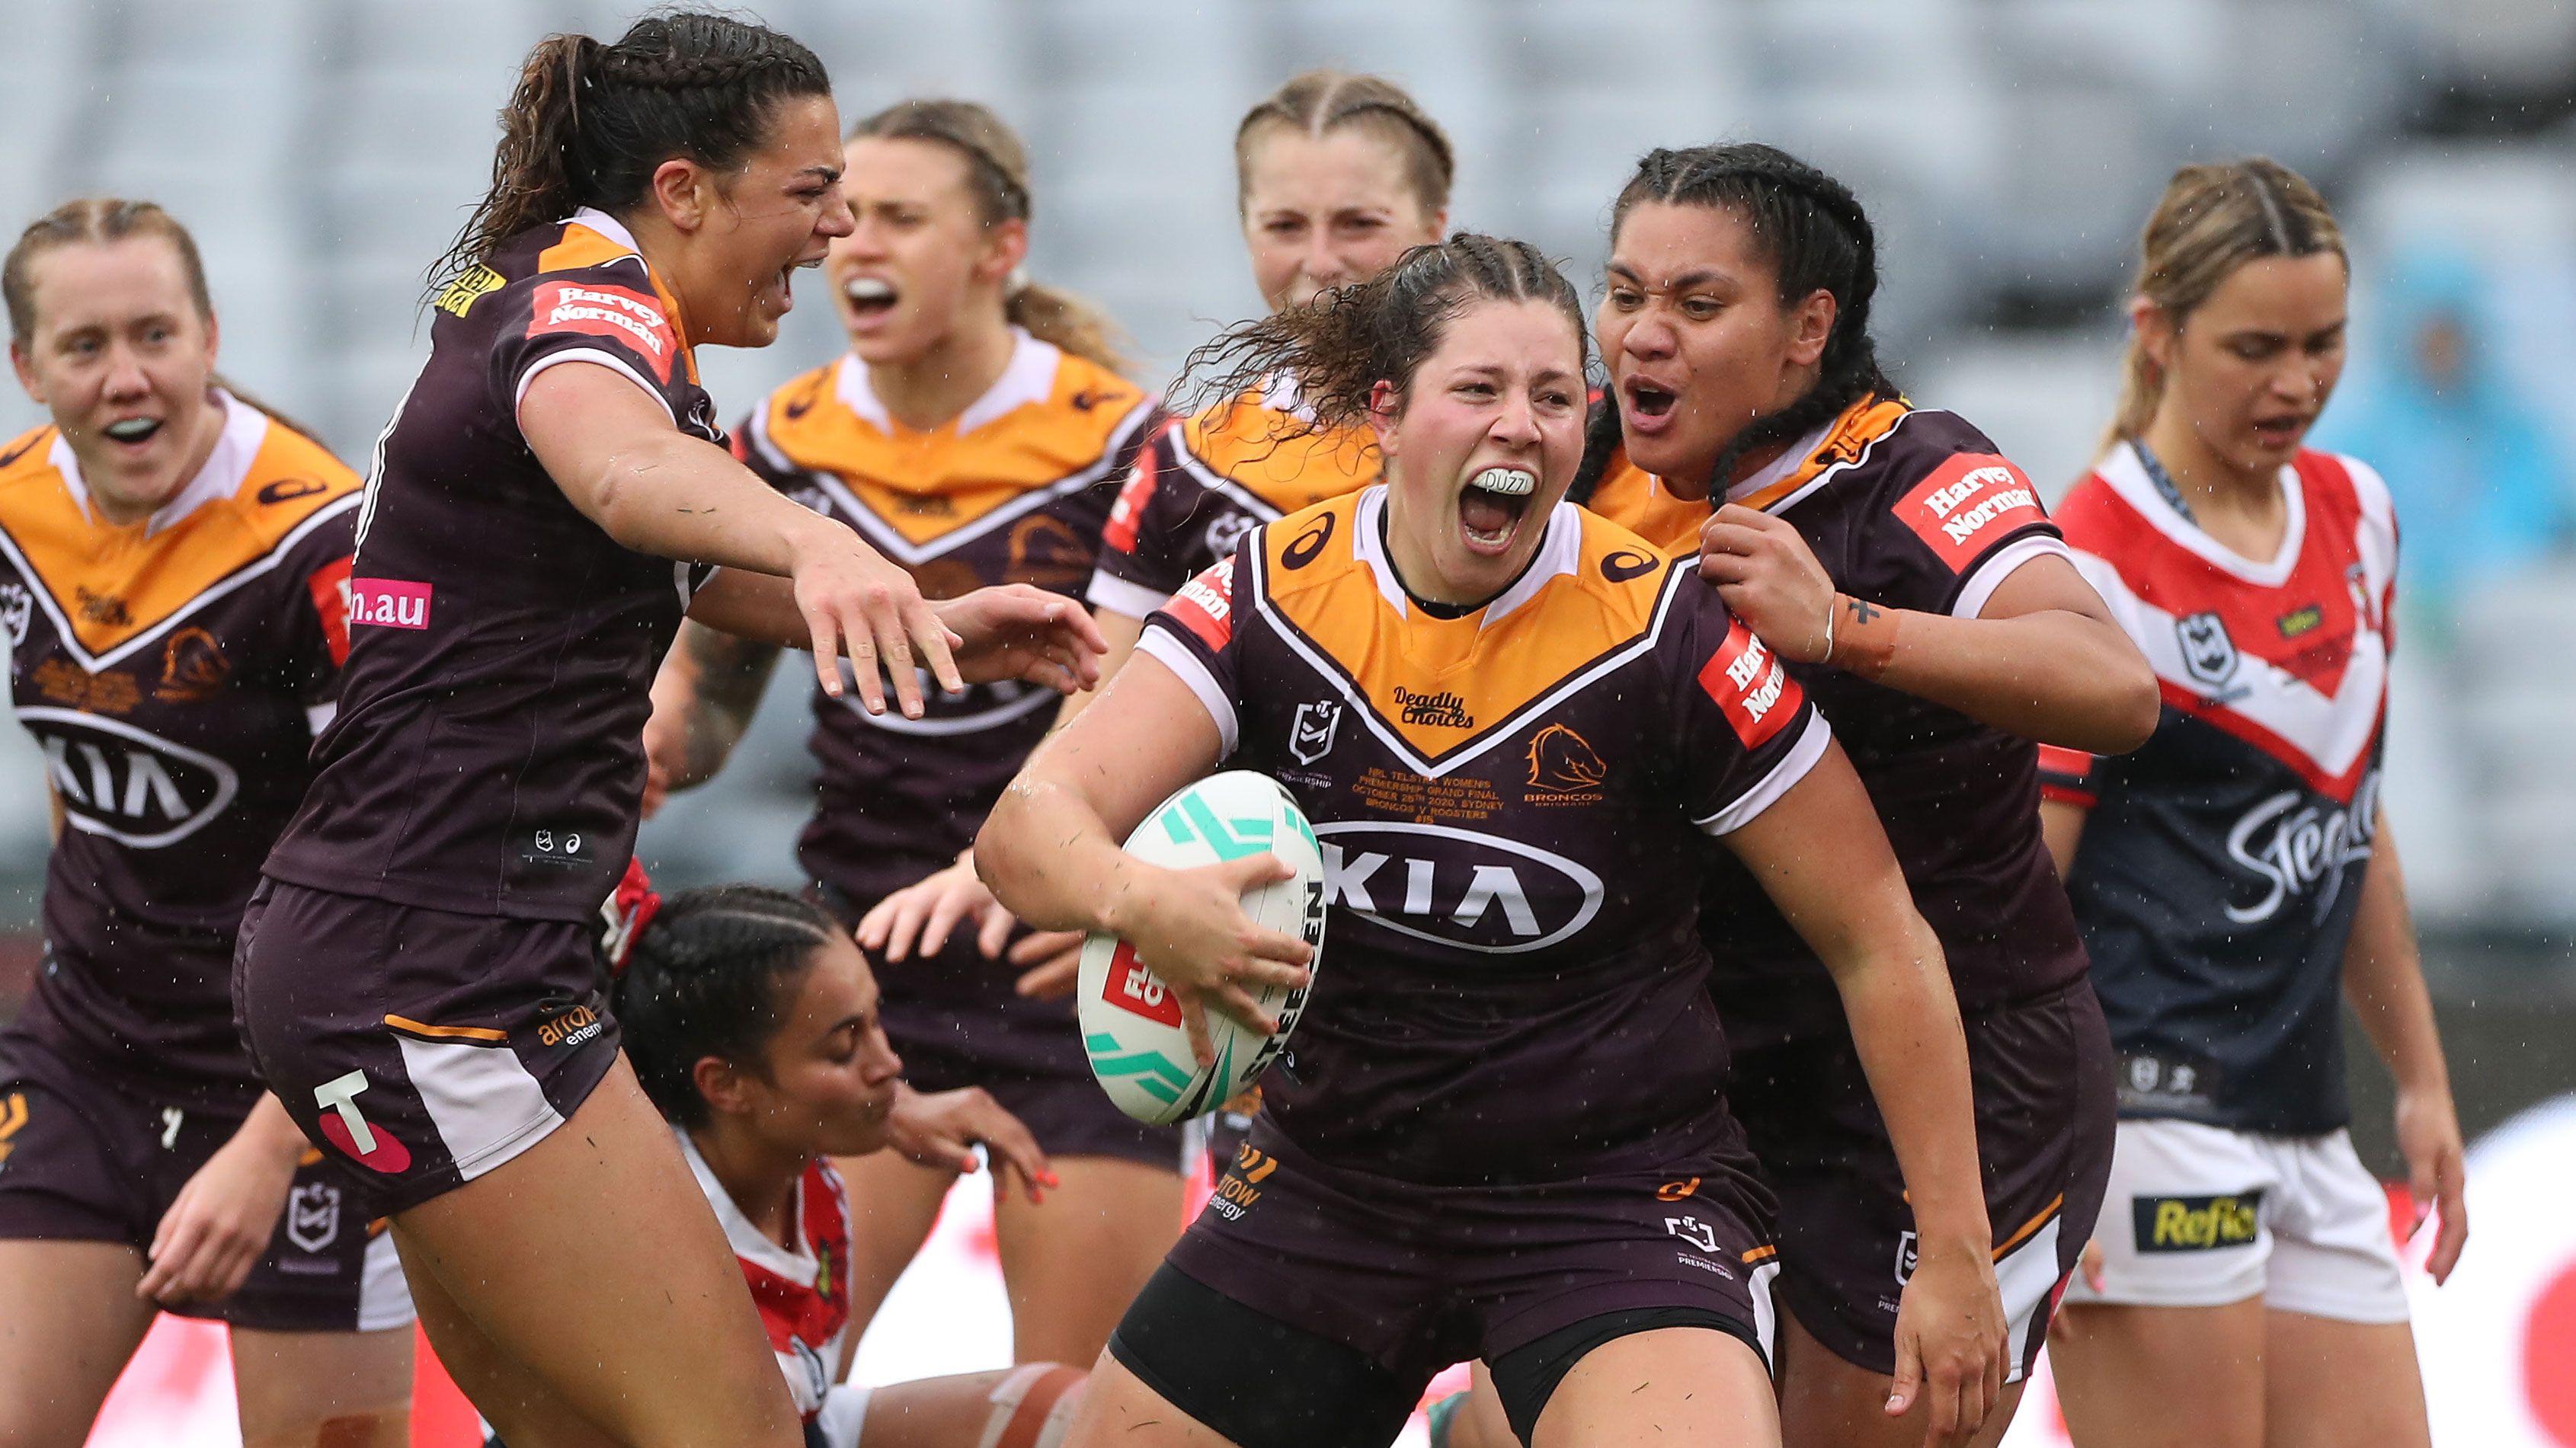 Chelsea Lenarduzzi of the Broncos celebrates with teammates after scoring a try during the 2020 NRLW Grand Final.